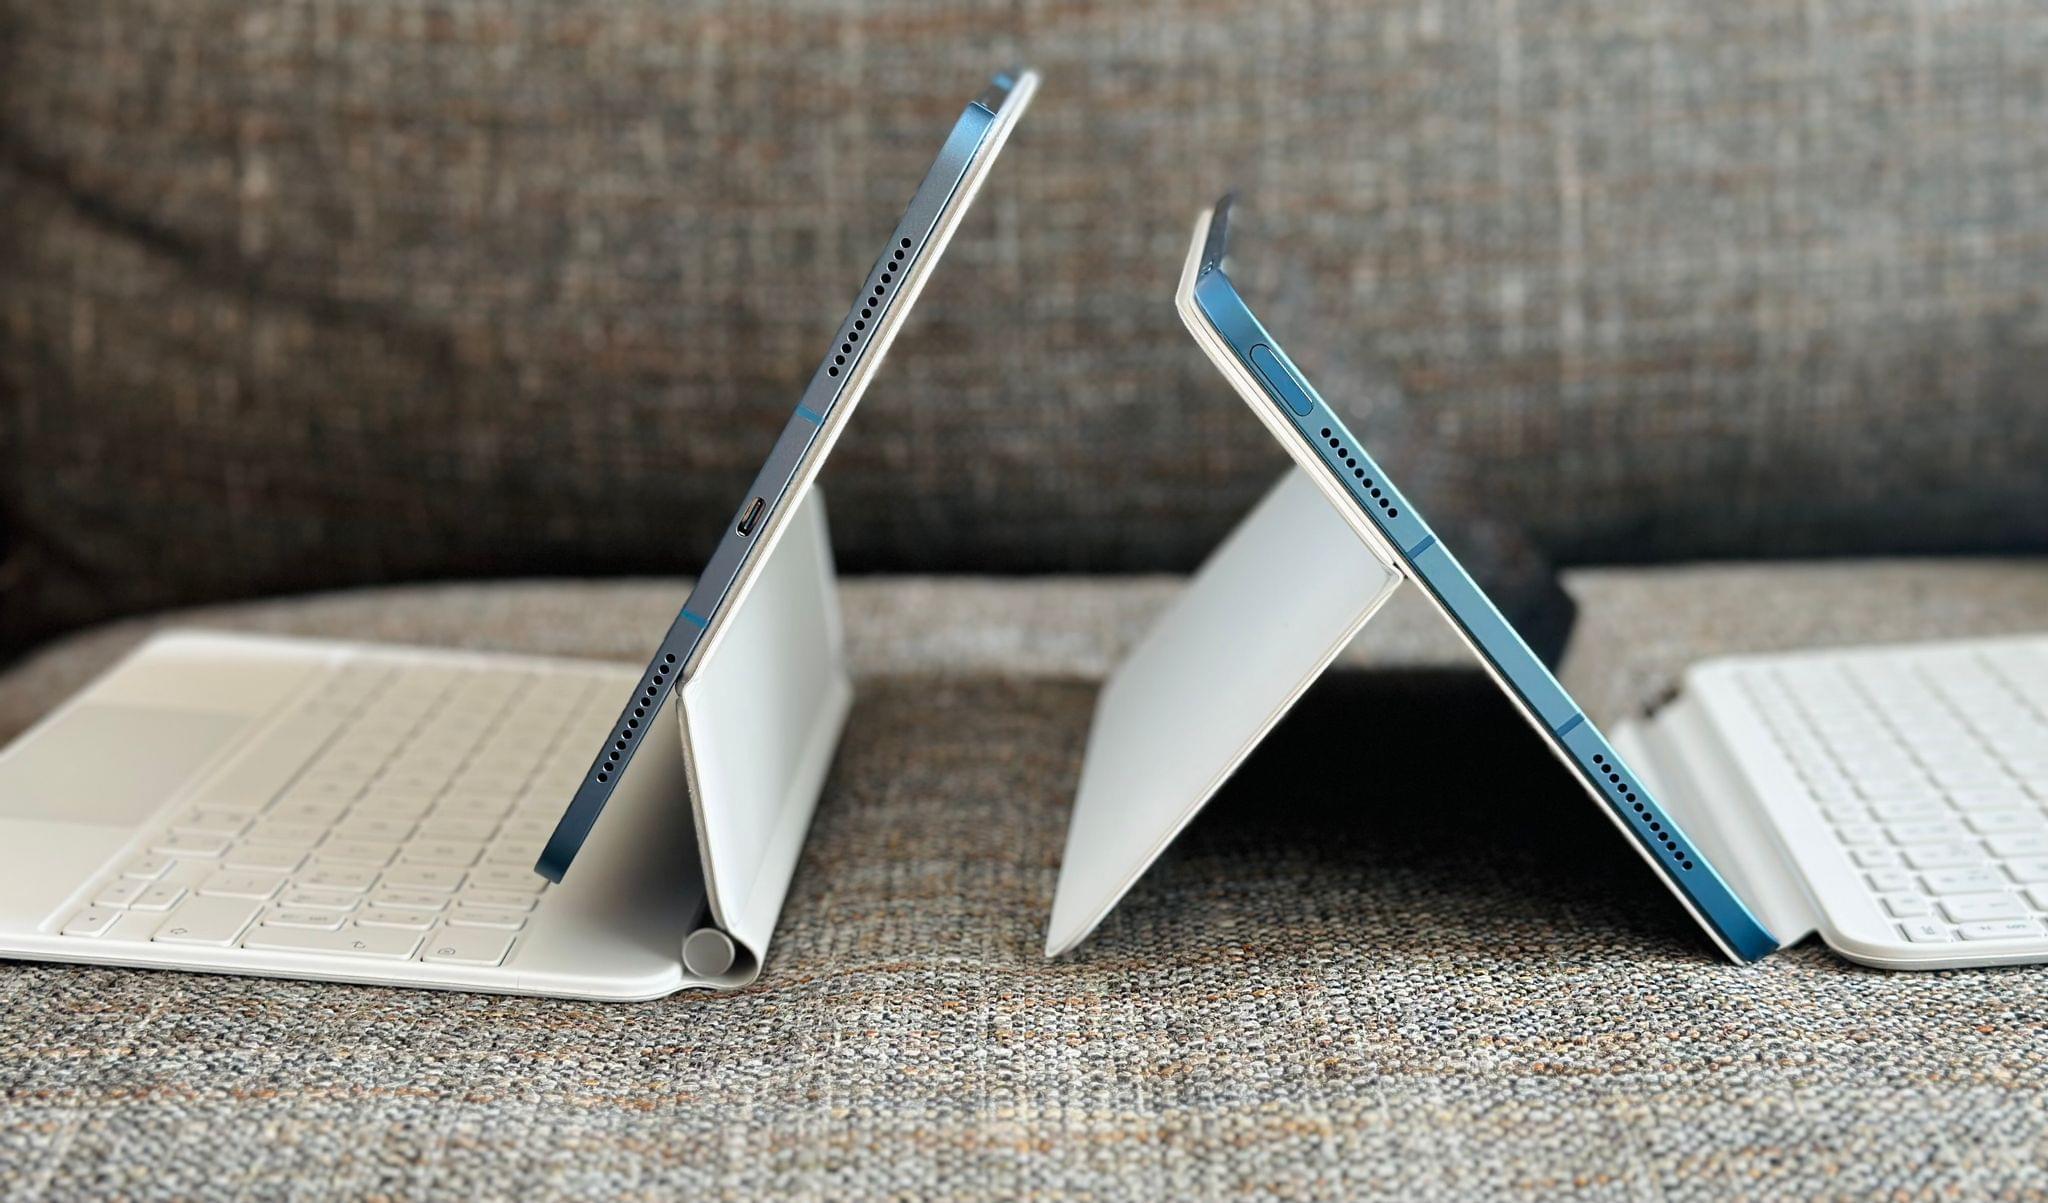 The flat side of the iPad (right) is also more colorful than the iPad Air's (left).